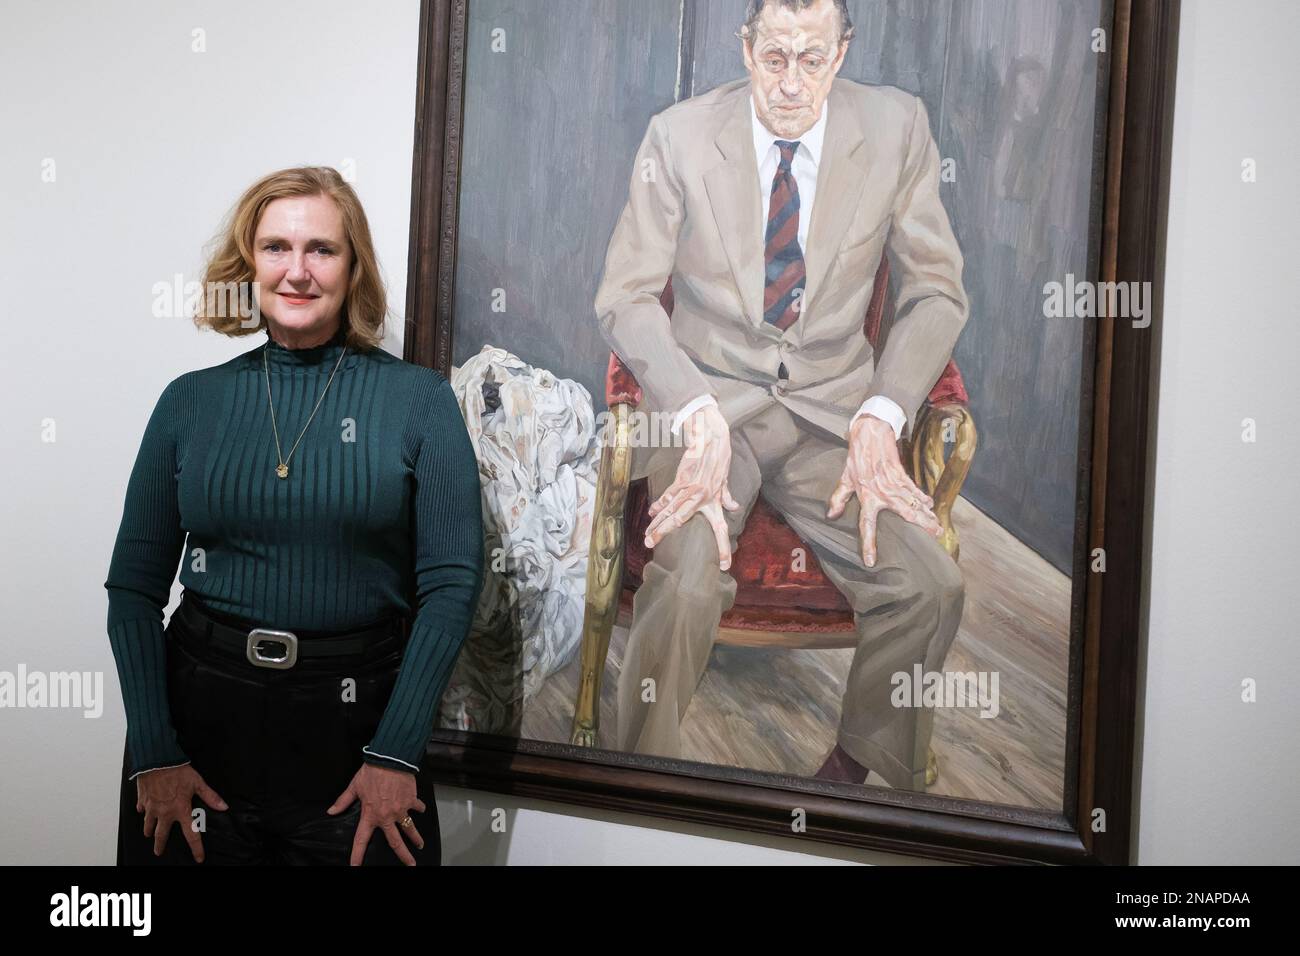 Francesca Thyssen-Bornemisza poses next to the painting 'man in a chair (portrait of Baron Thyssen)' during the presentation of the Lucian Freud exhibition at the Thyssen-Bornemisza museum in Madrid. Stock Photo